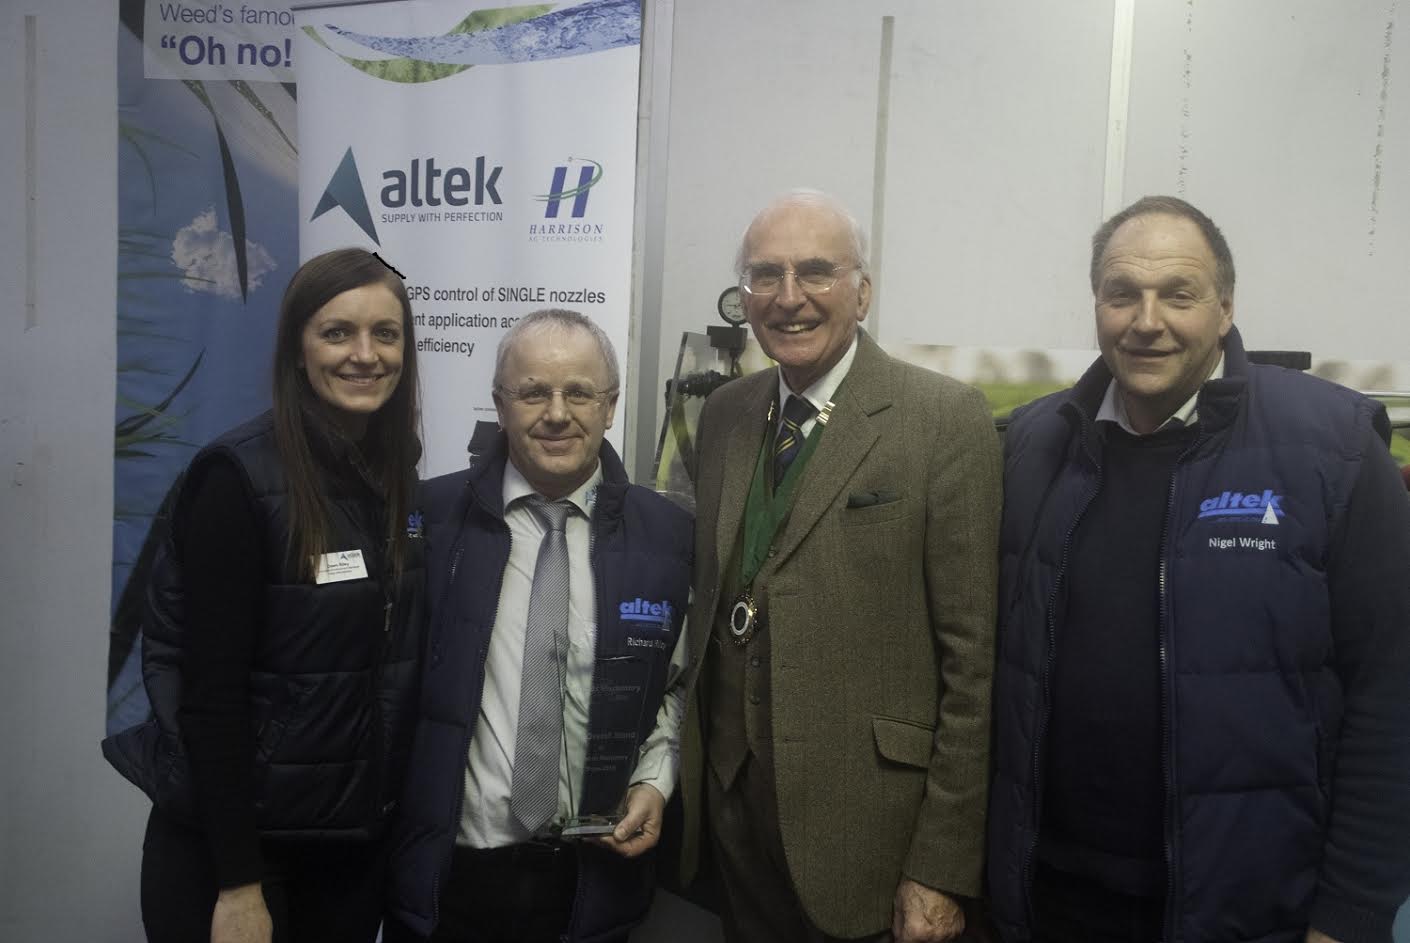 Altek won Best Overall Stand in Show and Best Agricultural Stand in Show